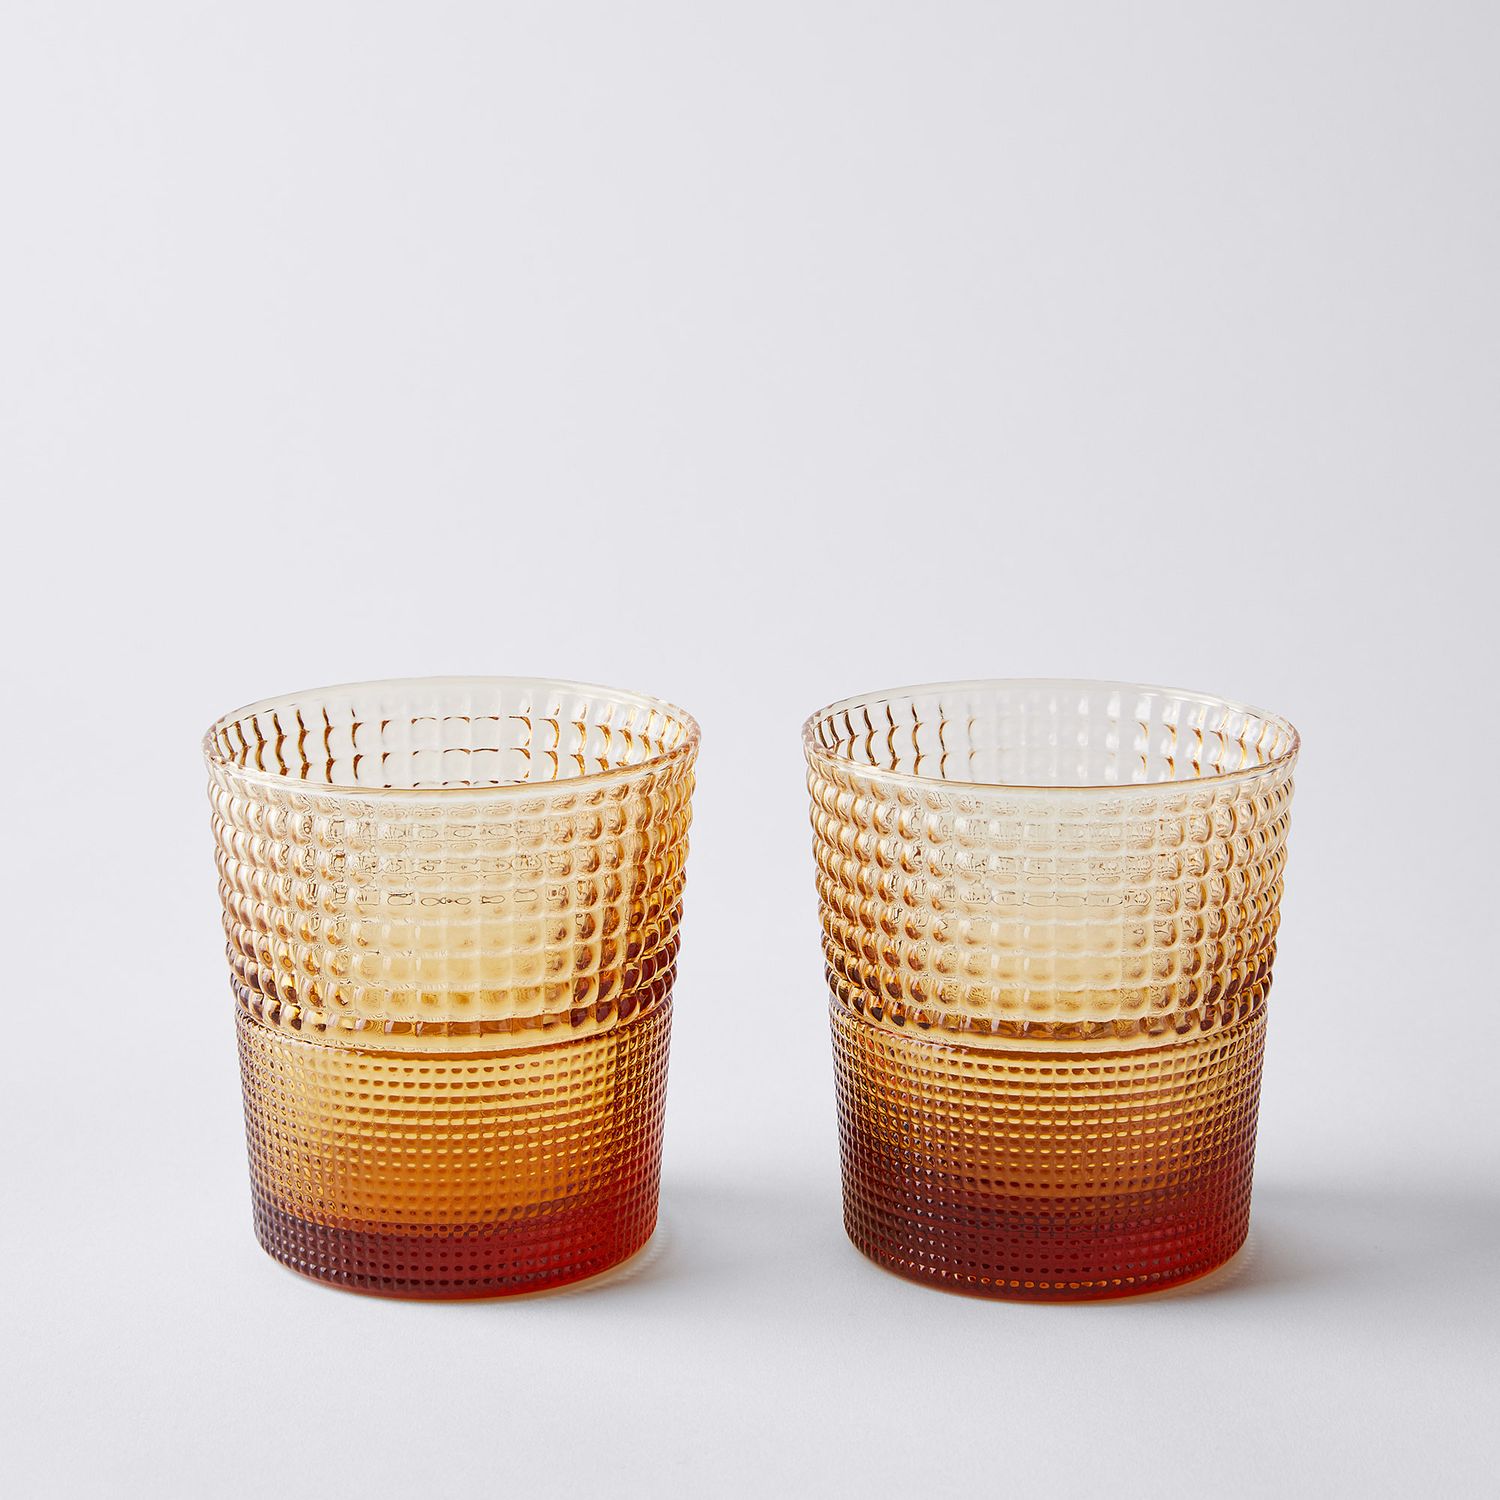 IVV Italian Retro Glass Tumblers, Set of 2, Mouth-Blown | Food52